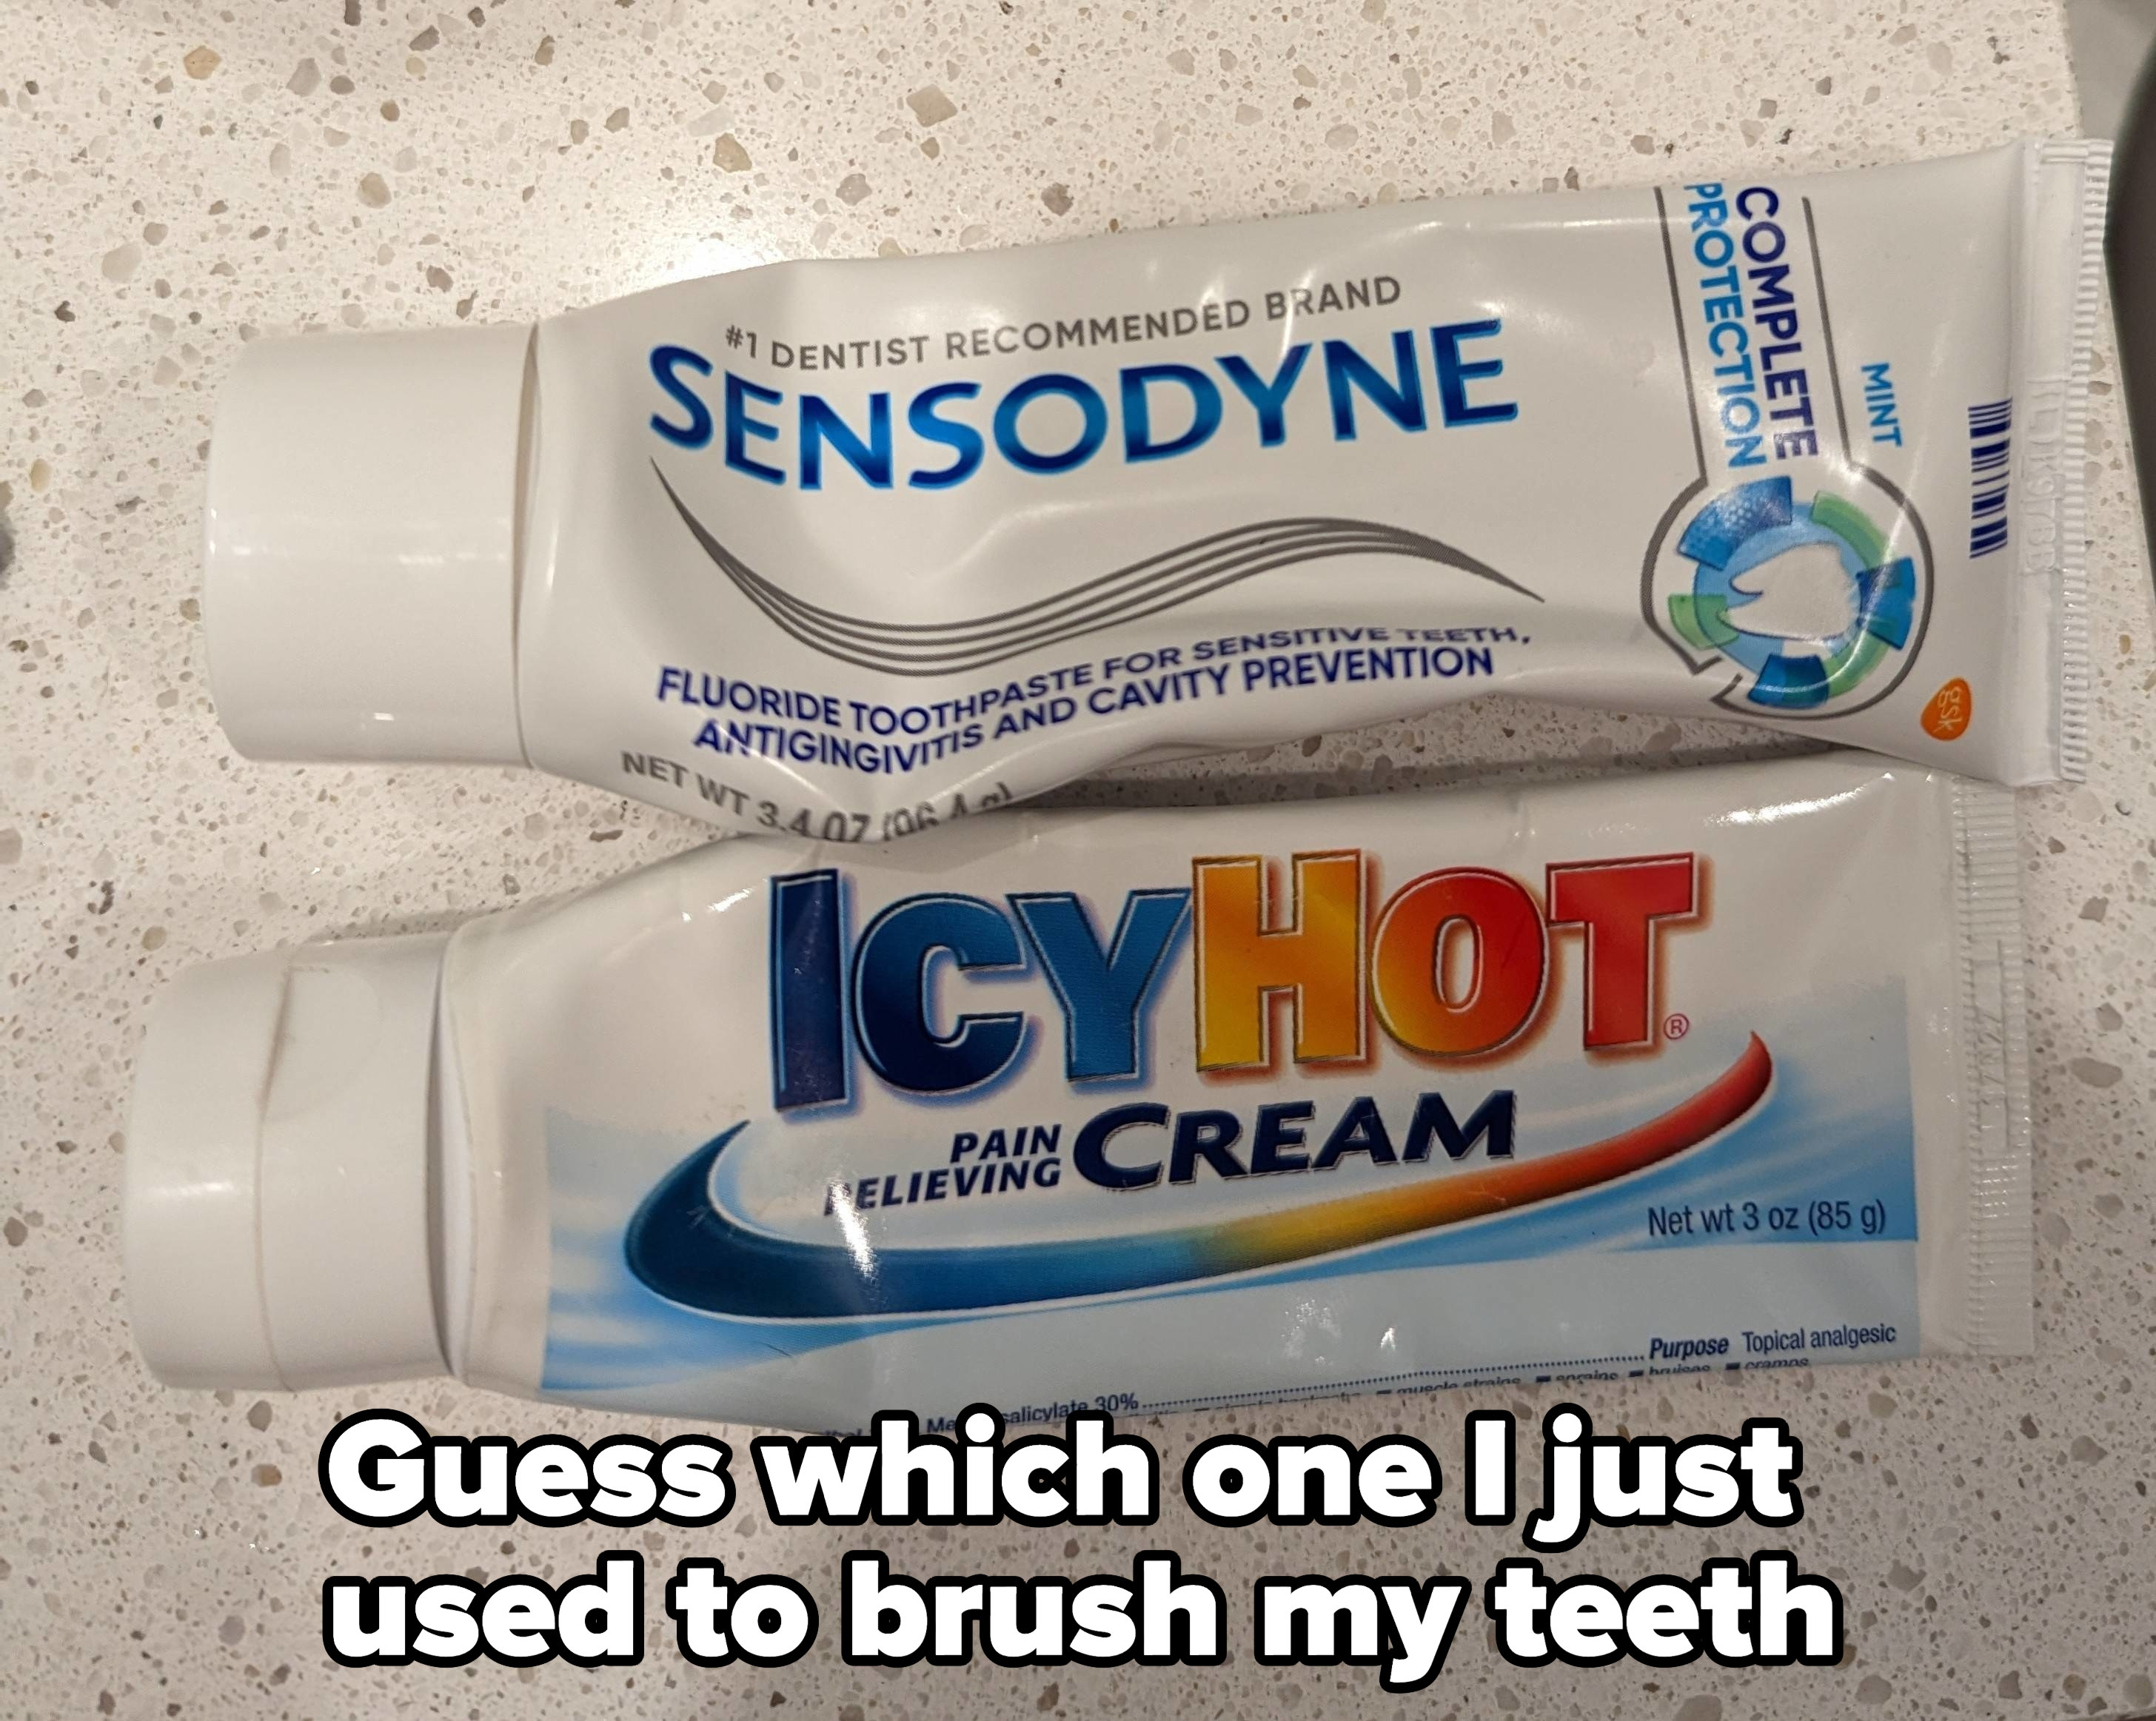 icy hot next to a tube of toothpaste